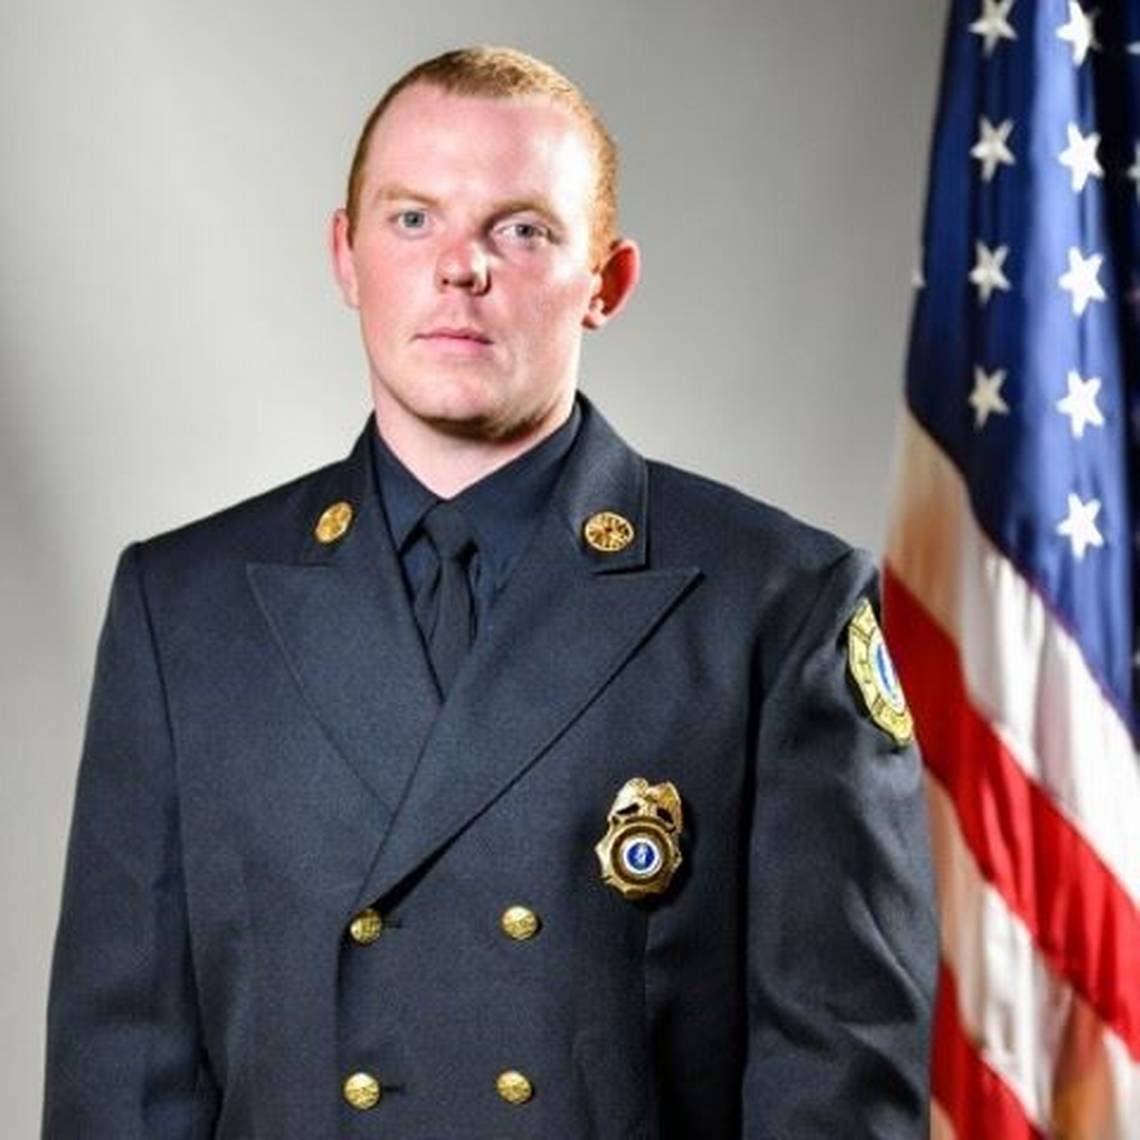 Updated: City identifies firefighter who died from injuries in south Wichita house fire